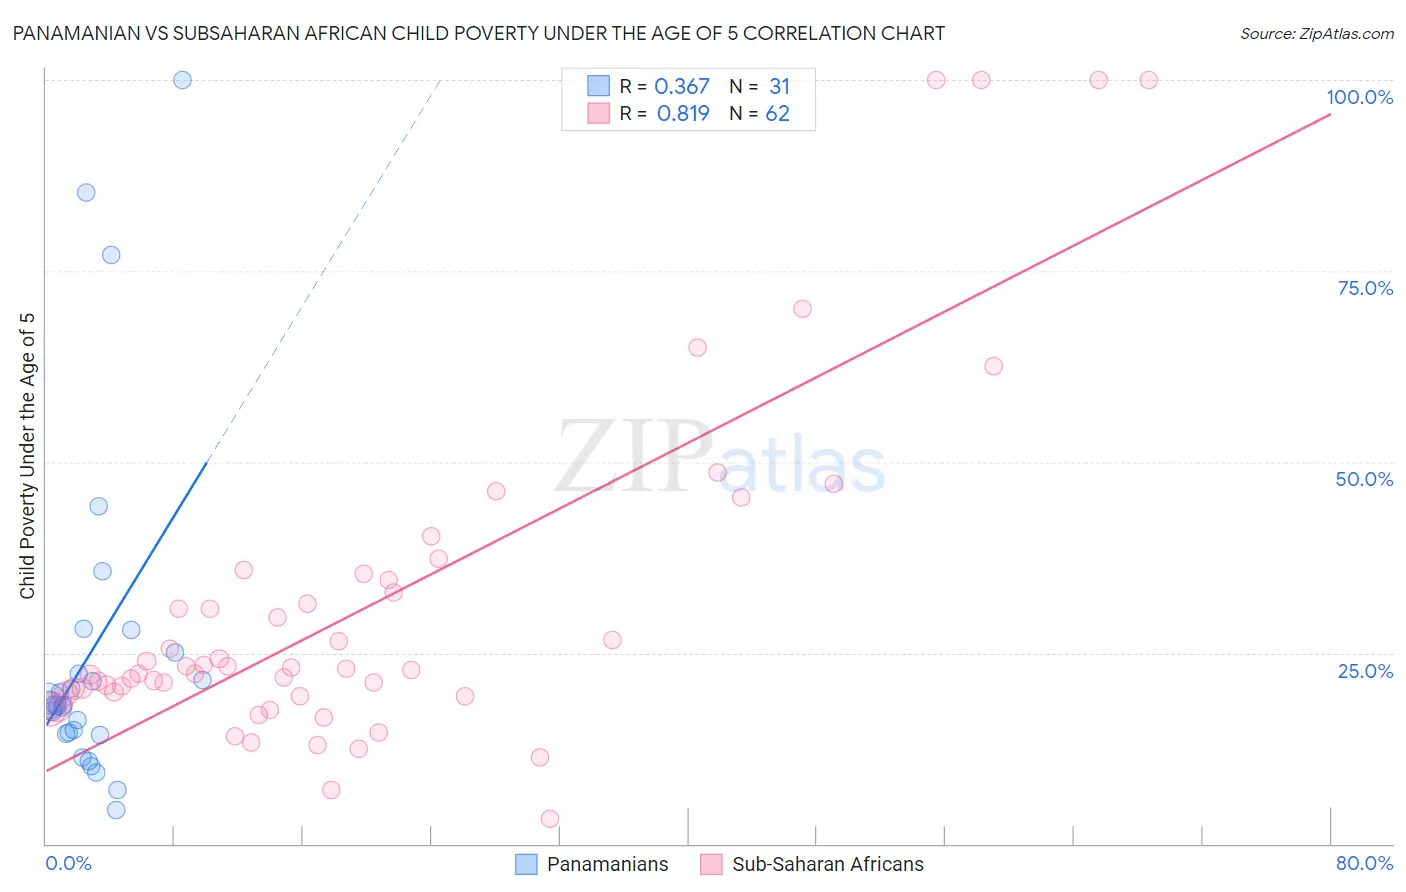 Panamanian vs Subsaharan African Child Poverty Under the Age of 5